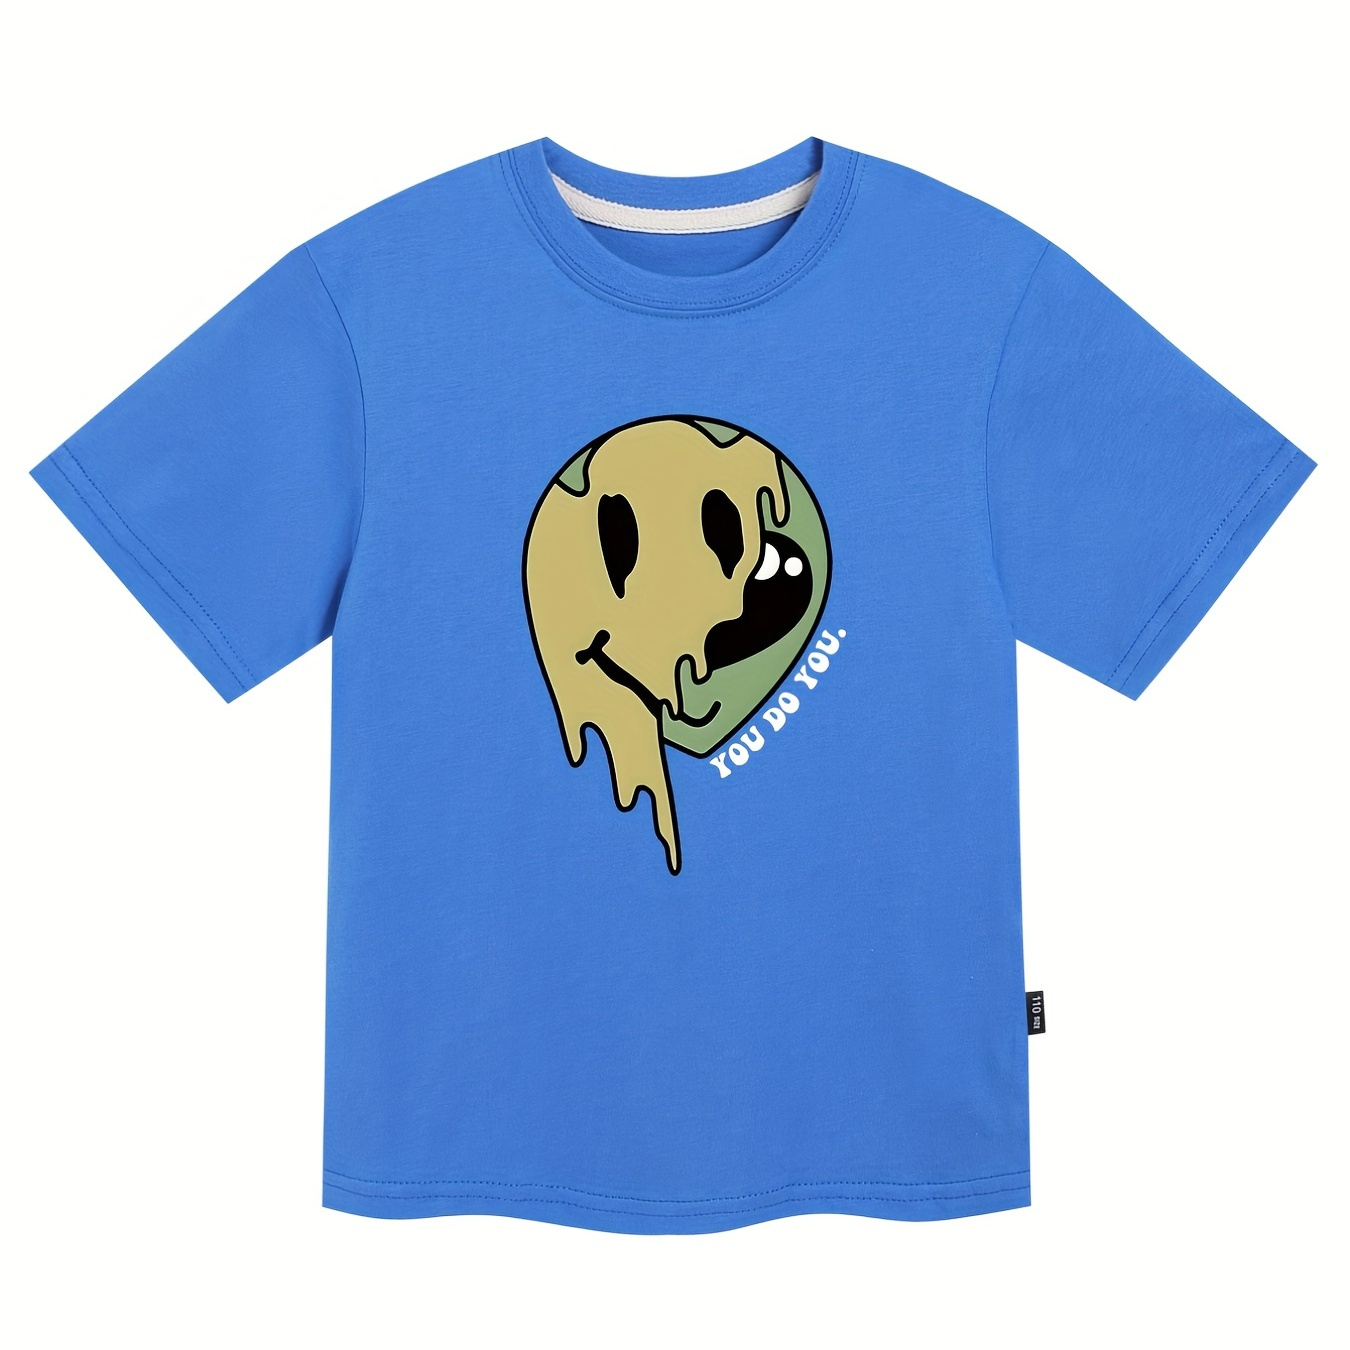 

Alien And Smile Face Print Boys Creative T-shirt, Casual Lightweight Comfy Short Sleeve Tee Tops, Kids Clothings For Summer